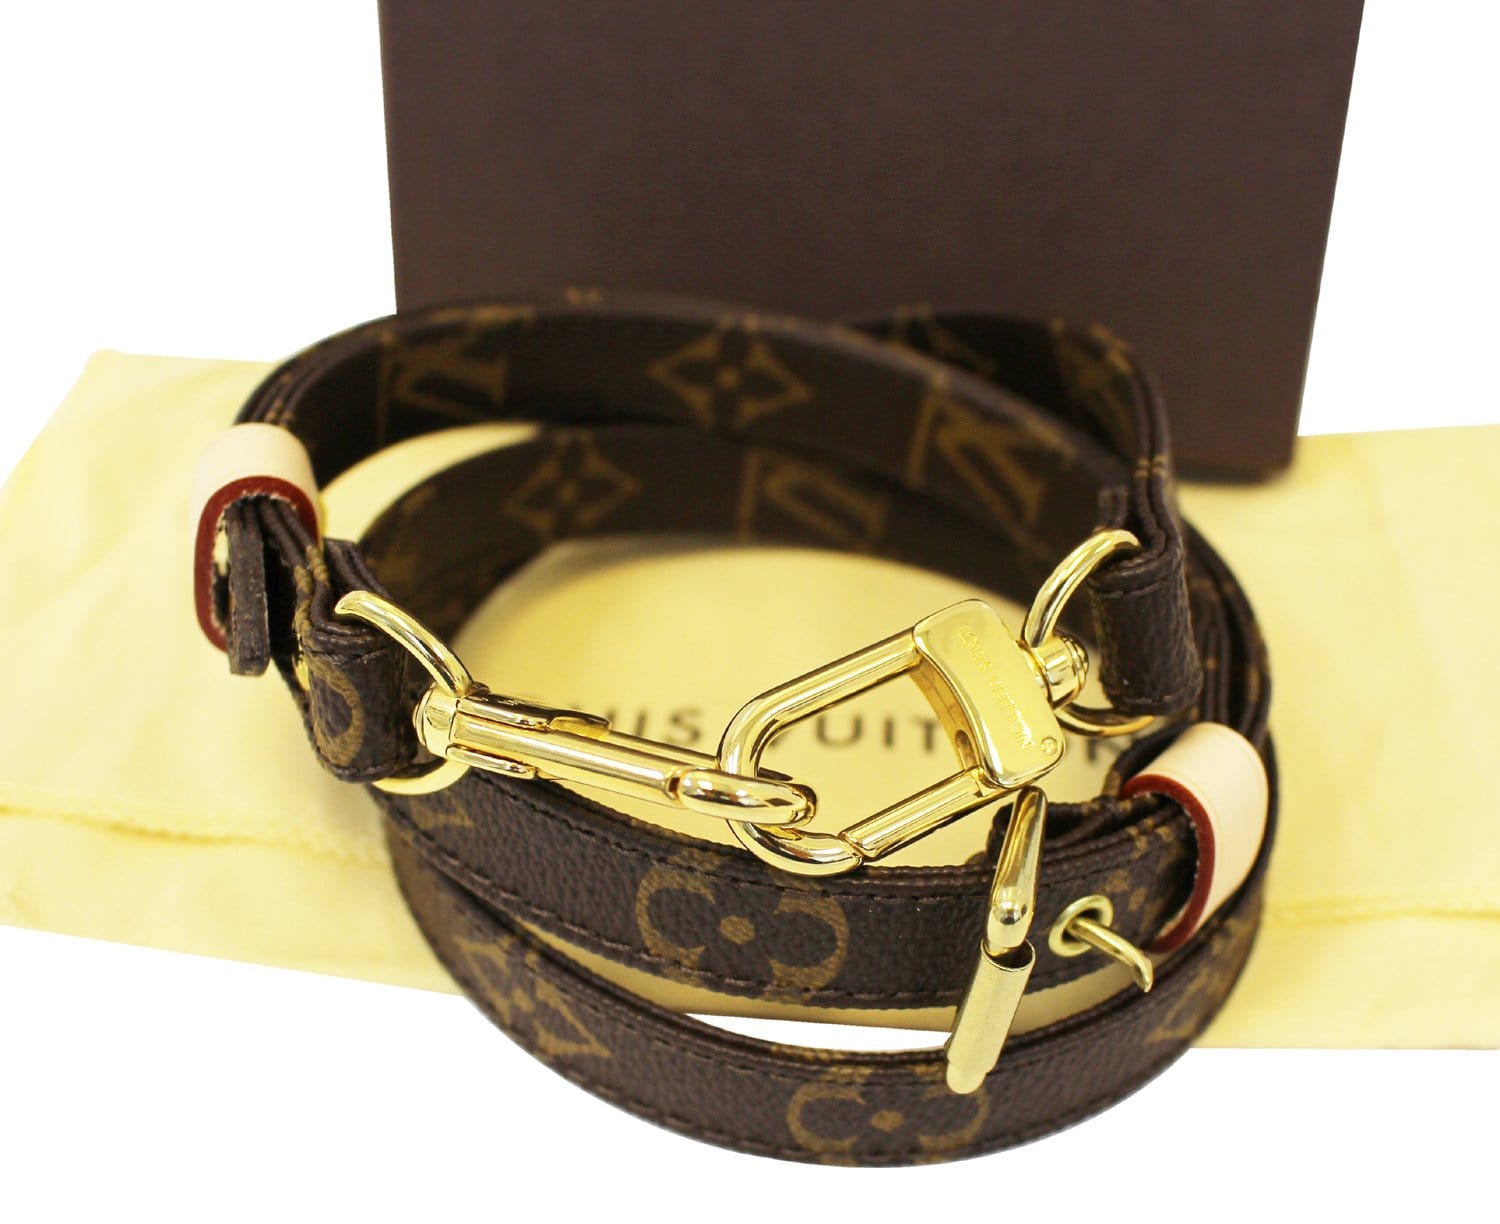 Replacement Leather Bag Strap(double-sided) for LV Pochette Metis